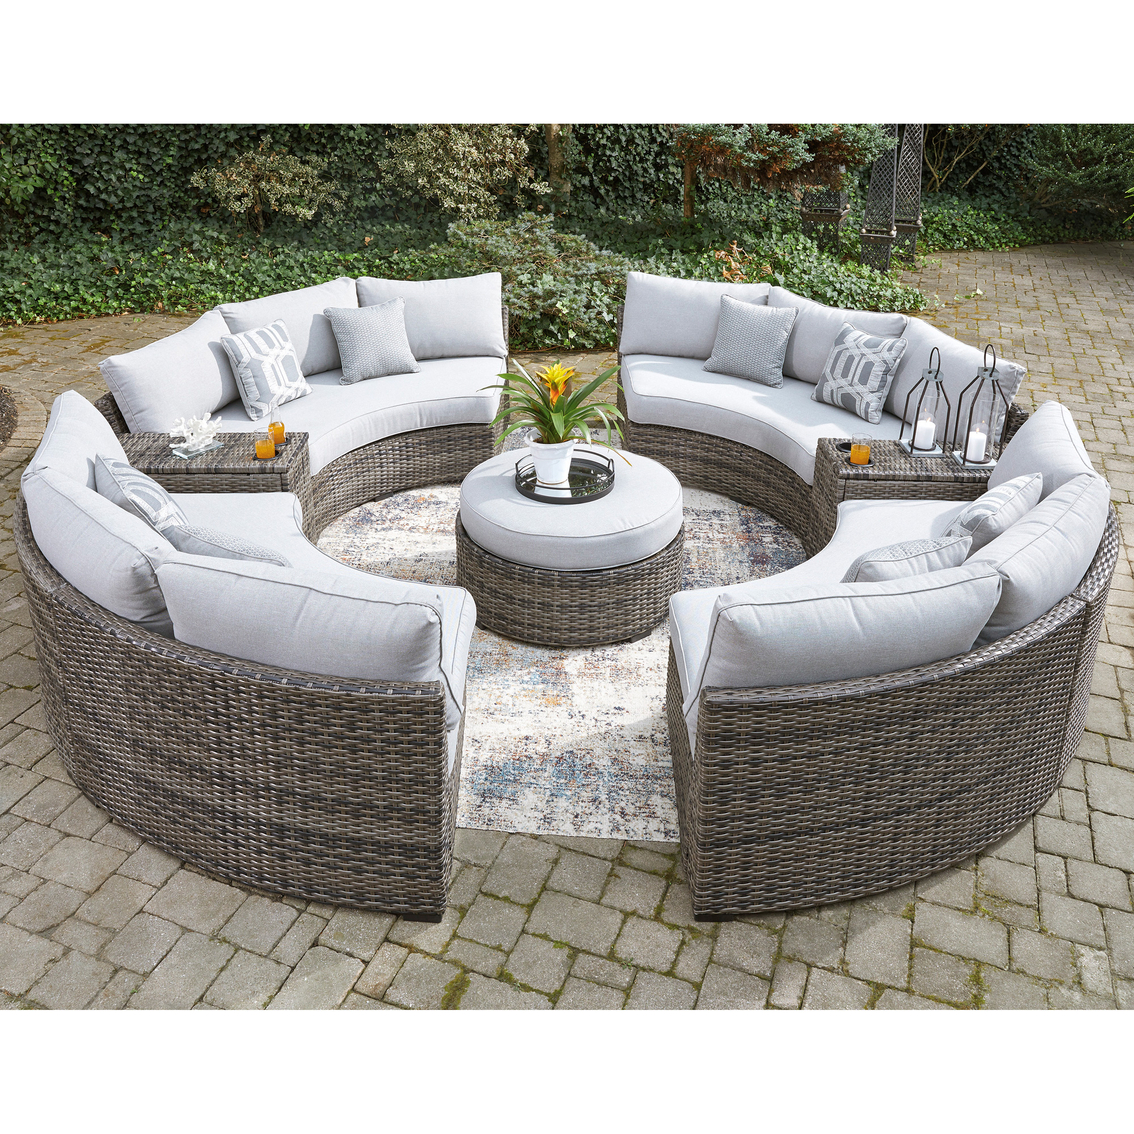 Signature Design by Ashley Harbor Court 7 pc. Outdoor Set - Image 2 of 6